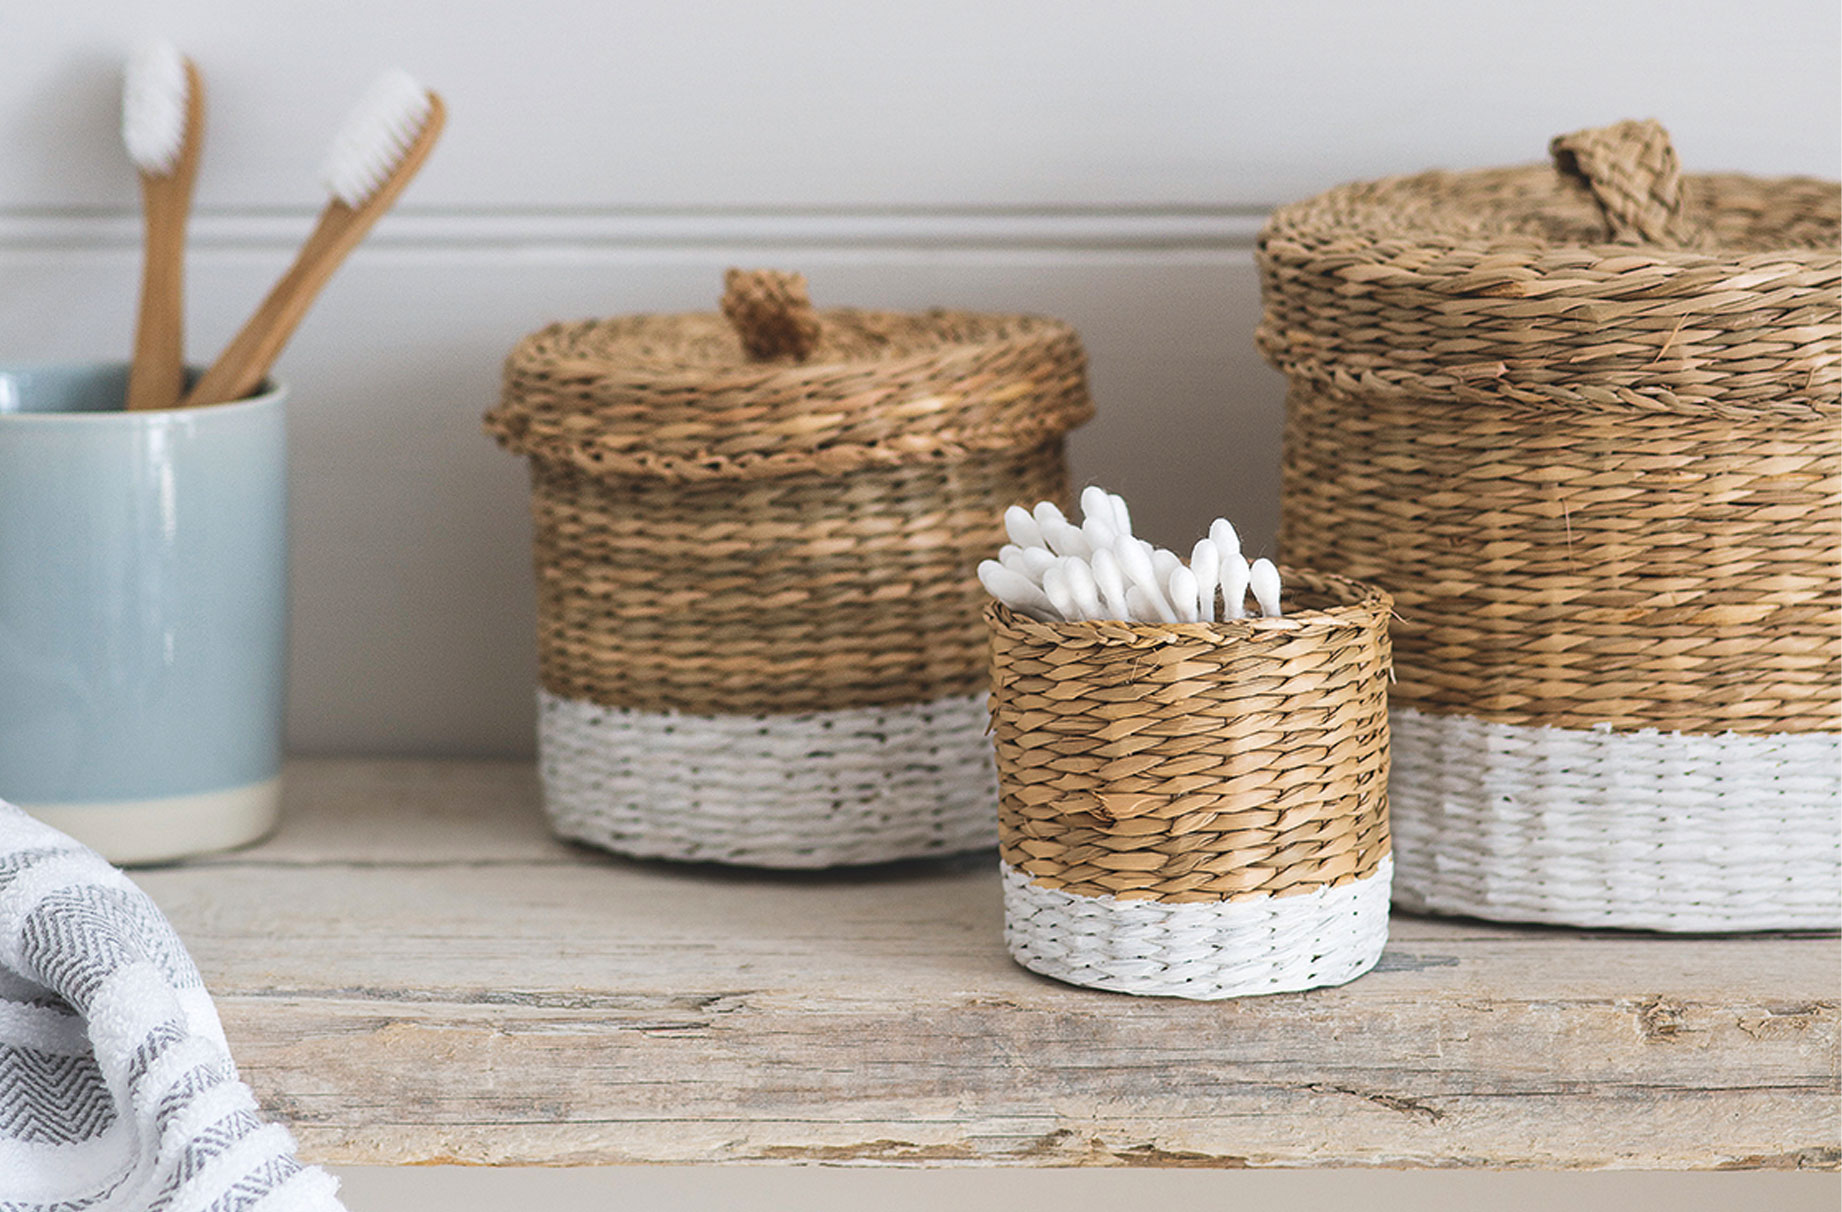 How to paint your own bathroom baskets - Good To